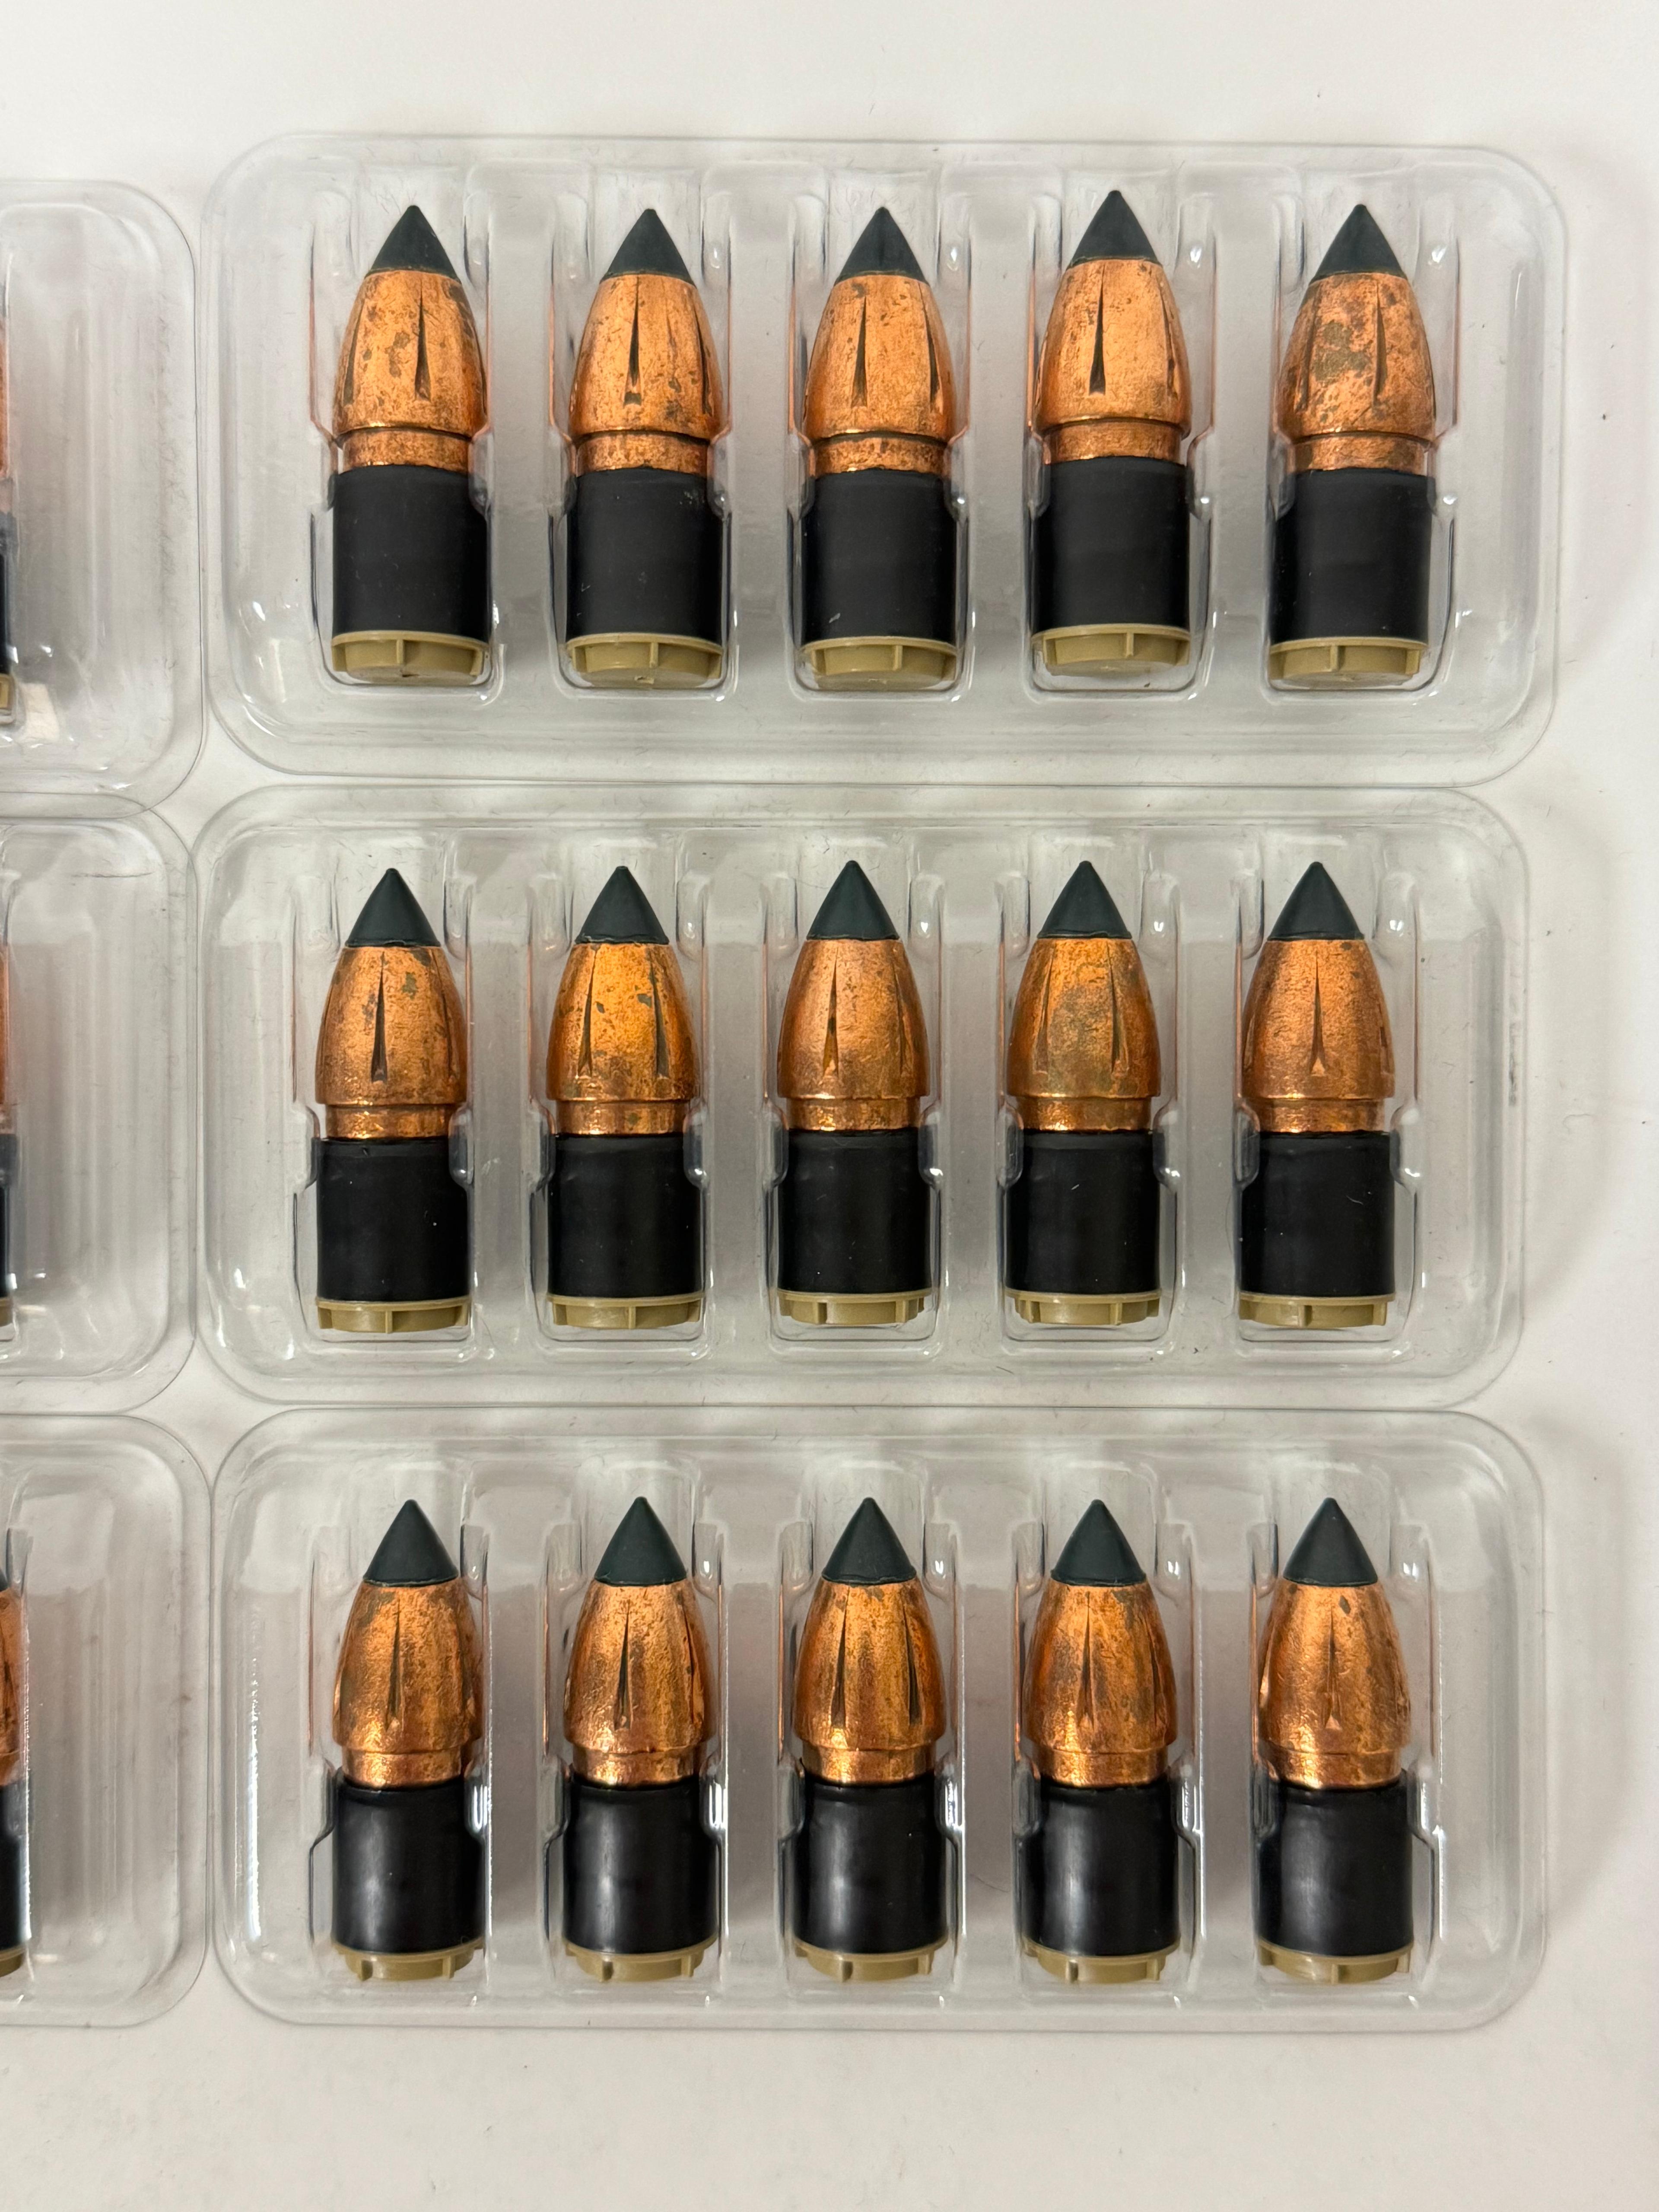 42qty. 50 CAL. 350gr. Lead-Tipped Performance Muzzle Loading Bullets